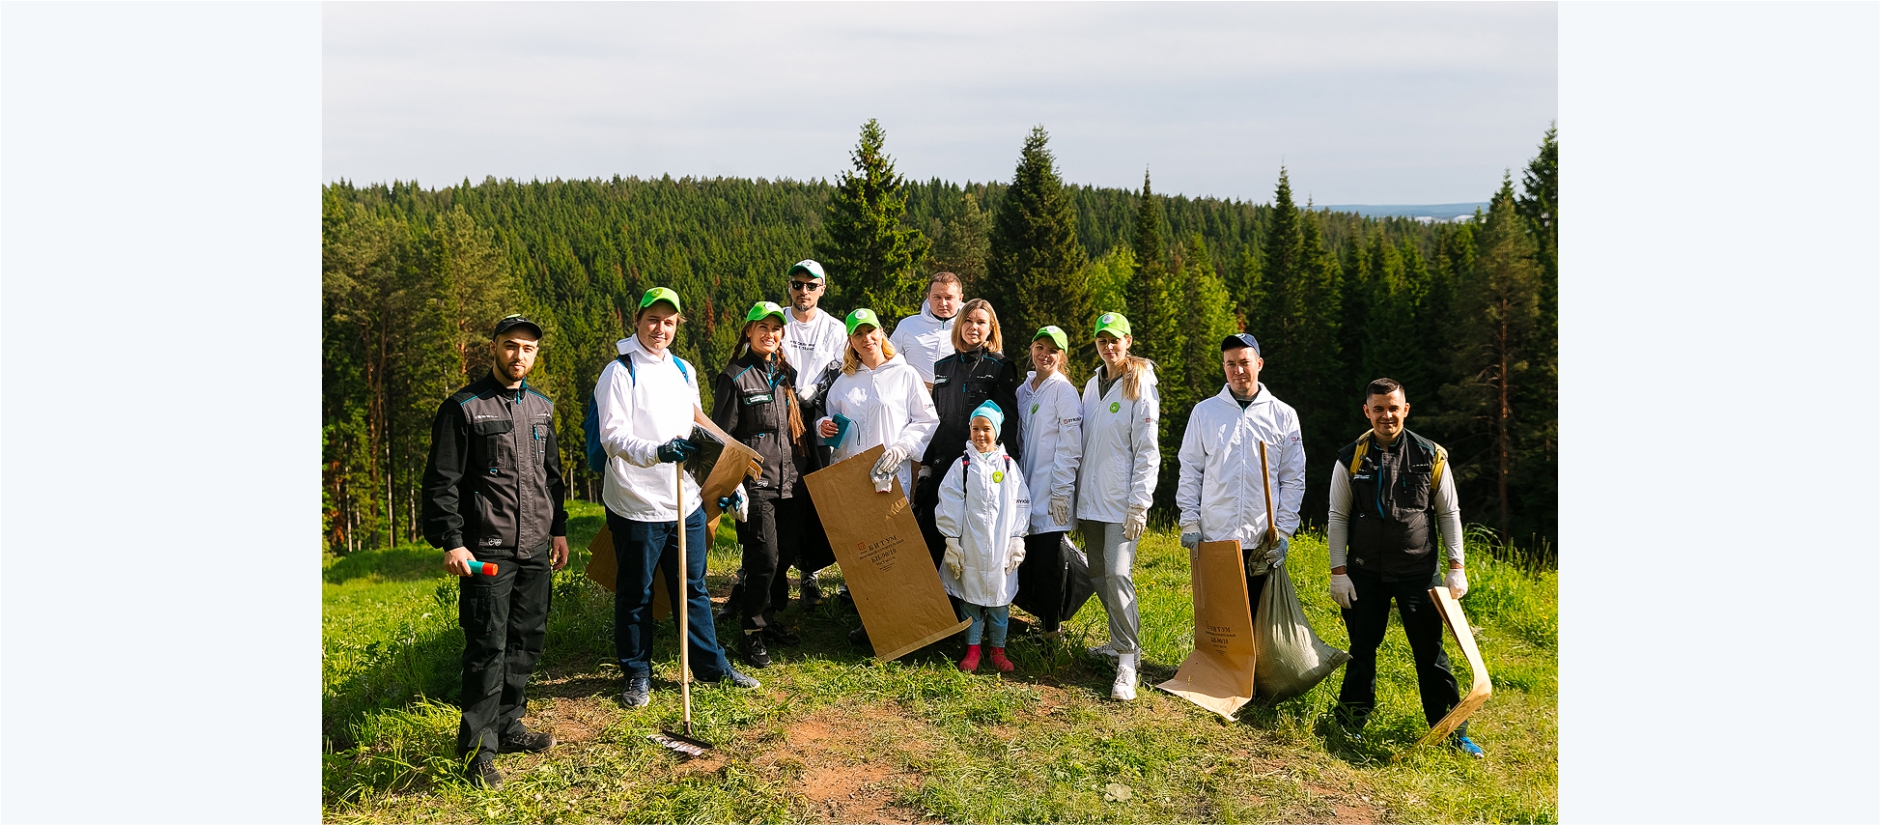 Environmental campaign in Andronovsky forest, the city of Perm